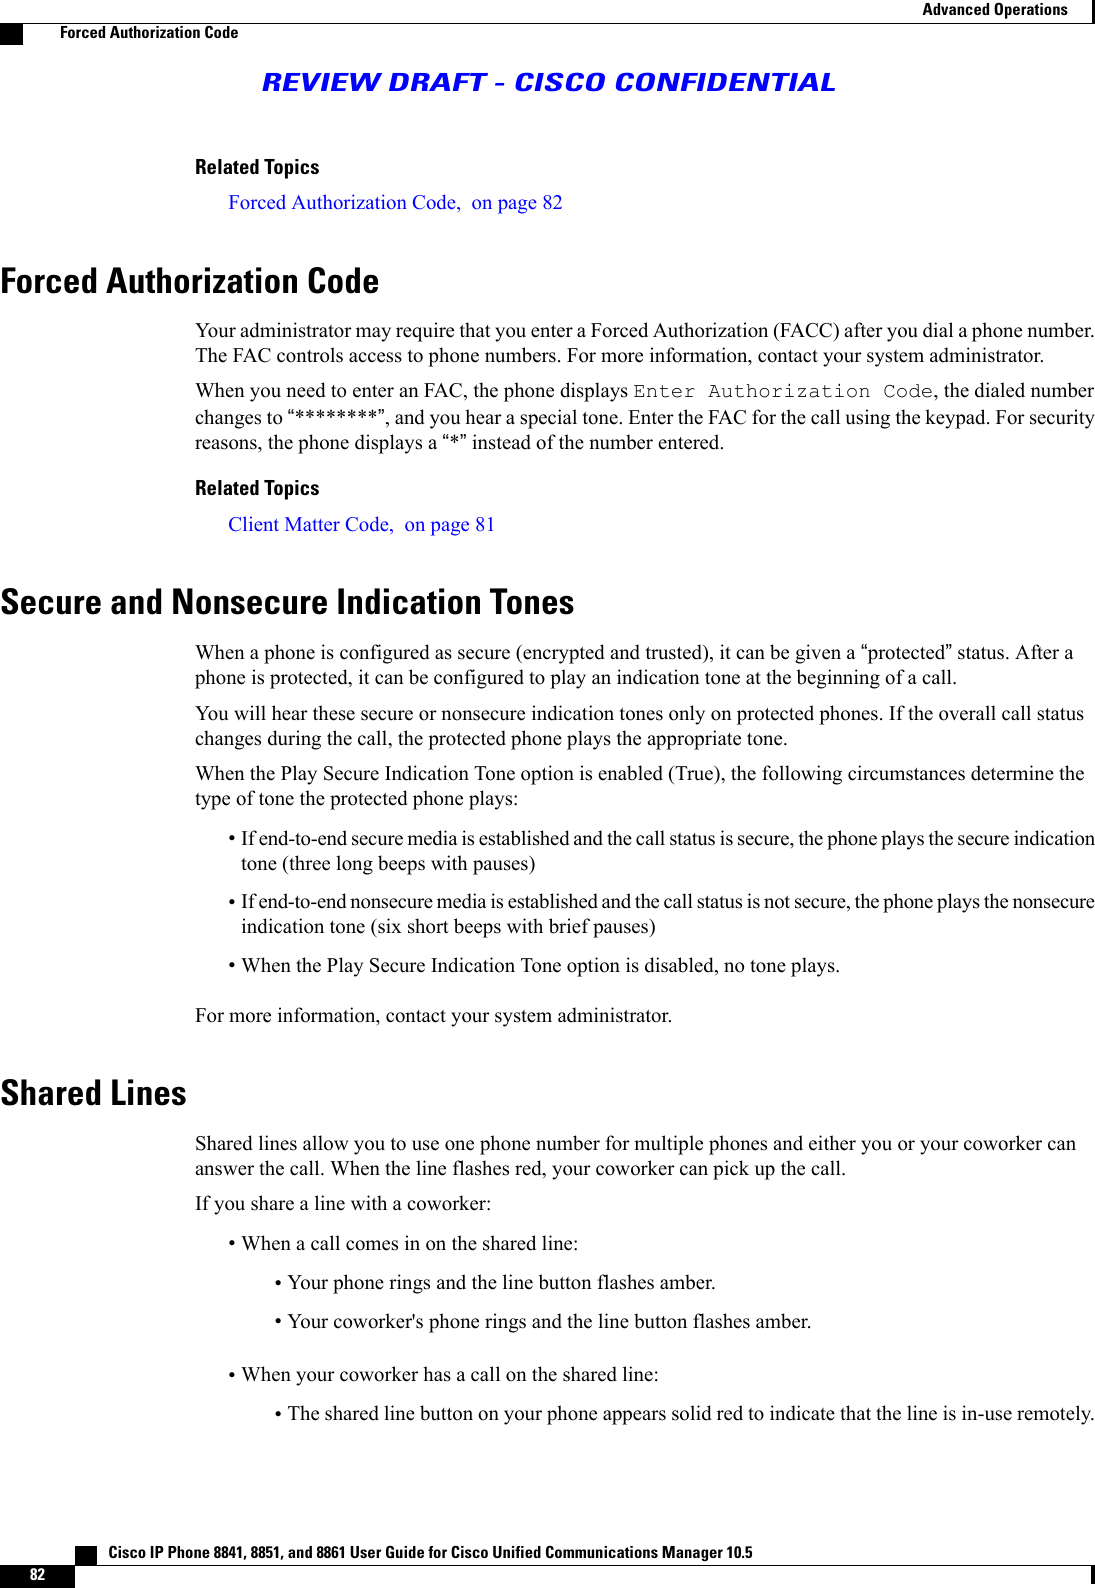 Related TopicsForced Authorization Code, on page 82Forced Authorization CodeYour administrator may require that you enter a Forced Authorization (FACC) after you dial a phone number.The FAC controls access to phone numbers. For more information, contact your system administrator.When you need to enter an FAC, the phone displays Enter Authorization Code, the dialed numberchanges to “********”, and you hear a special tone. Enter the FAC for the call using the keypad. For securityreasons, the phone displays a “*”instead of the number entered.Related TopicsClient Matter Code, on page 81Secure and Nonsecure Indication TonesWhen a phone is configured as secure (encrypted and trusted), it can be given a “protected”status. After aphone is protected, it can be configured to play an indication tone at the beginning of a call.You will hear these secure or nonsecure indication tones only on protected phones. If the overall call statuschanges during the call, the protected phone plays the appropriate tone.When the Play Secure Indication Tone option is enabled (True), the following circumstances determine thetype of tone the protected phone plays:•If end-to-end secure media is established and the call status is secure, the phone plays the secure indicationtone (three long beeps with pauses)•If end-to-end nonsecure media is established and the call status is not secure, the phone plays the nonsecureindication tone (six short beeps with brief pauses)•When the Play Secure Indication Tone option is disabled, no tone plays.For more information, contact your system administrator.Shared LinesShared lines allow you to use one phone number for multiple phones and either you or your coworker cananswer the call. When the line flashes red, your coworker can pick up the call.If you share a line with a coworker:•When a call comes in on the shared line:•Your phone rings and the line button flashes amber.•Your coworker&apos;s phone rings and the line button flashes amber.•When your coworker has a call on the shared line:•The shared line button on your phone appears solid red to indicate that the line is in-use remotely.   Cisco IP Phone 8841, 8851, and 8861 User Guide for Cisco Unified Communications Manager 10.582Advanced OperationsForced Authorization CodeREVIEW DRAFT - CISCO CONFIDENTIAL